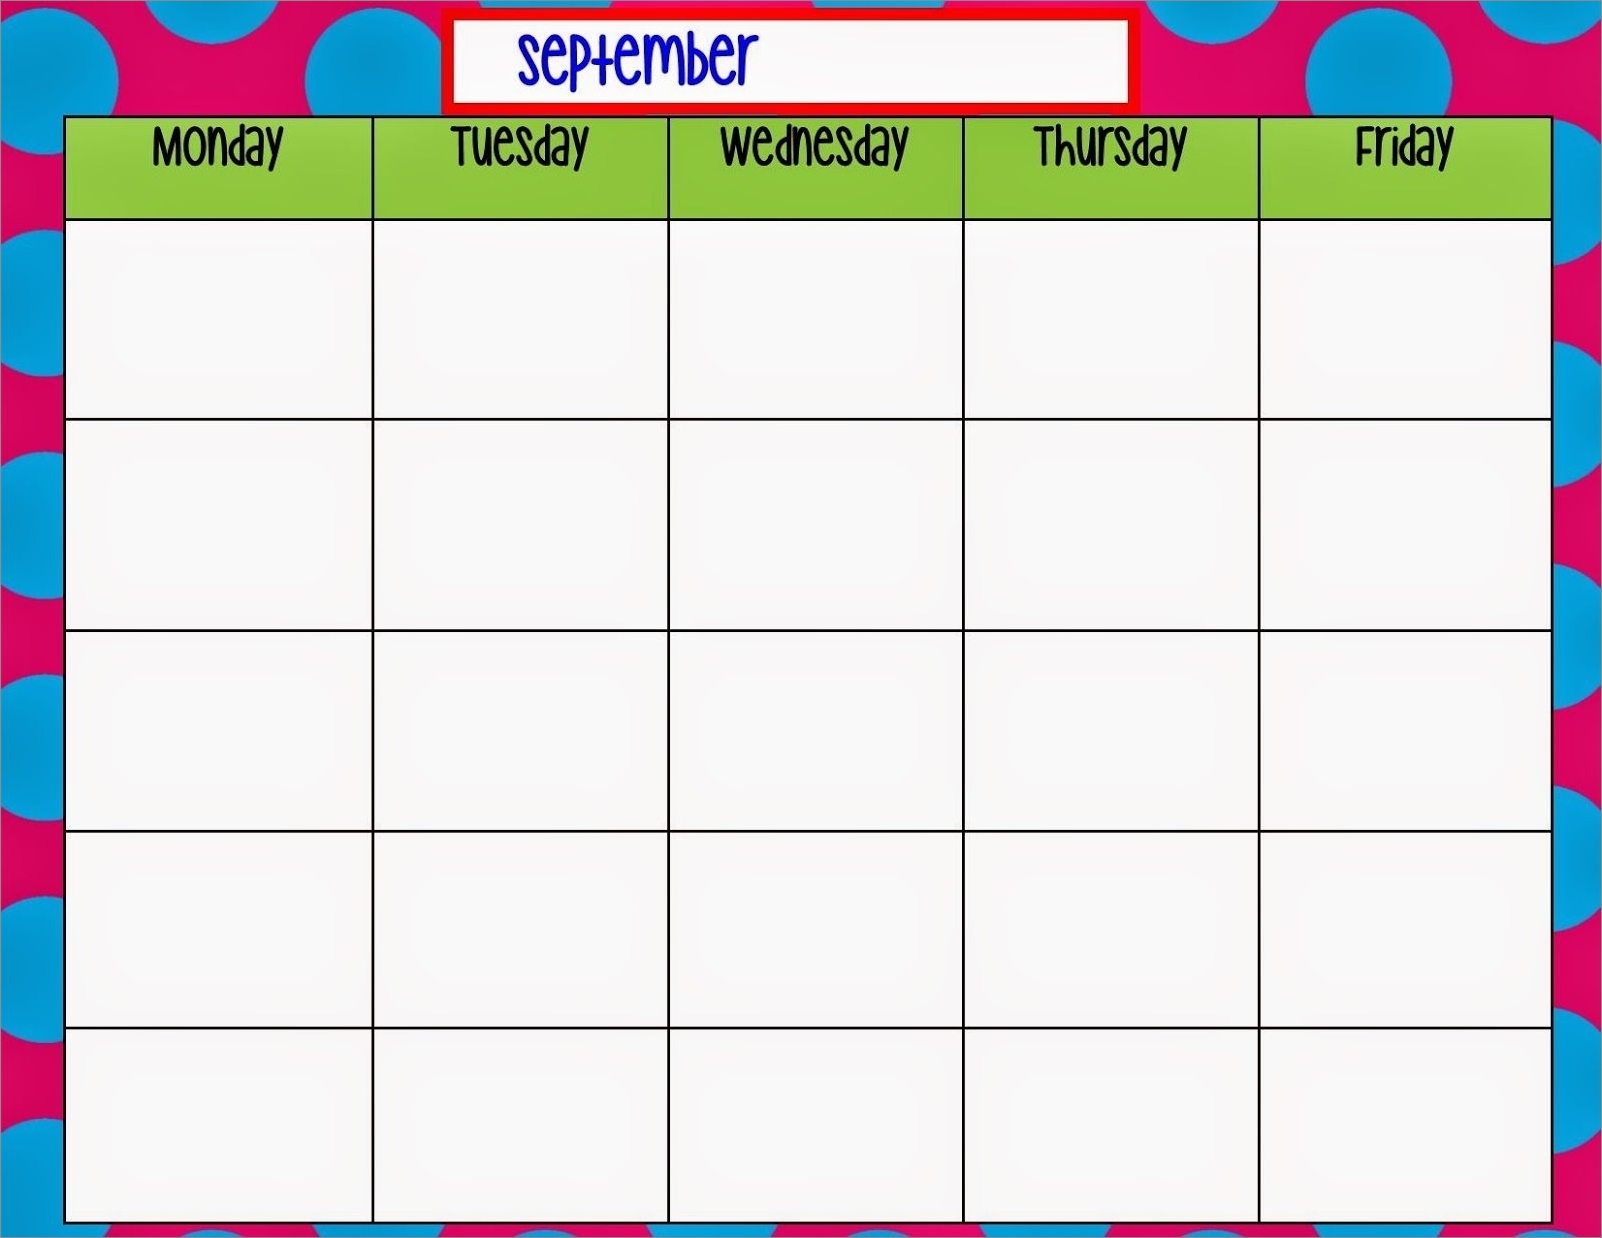 monday-to-friday schedule template example